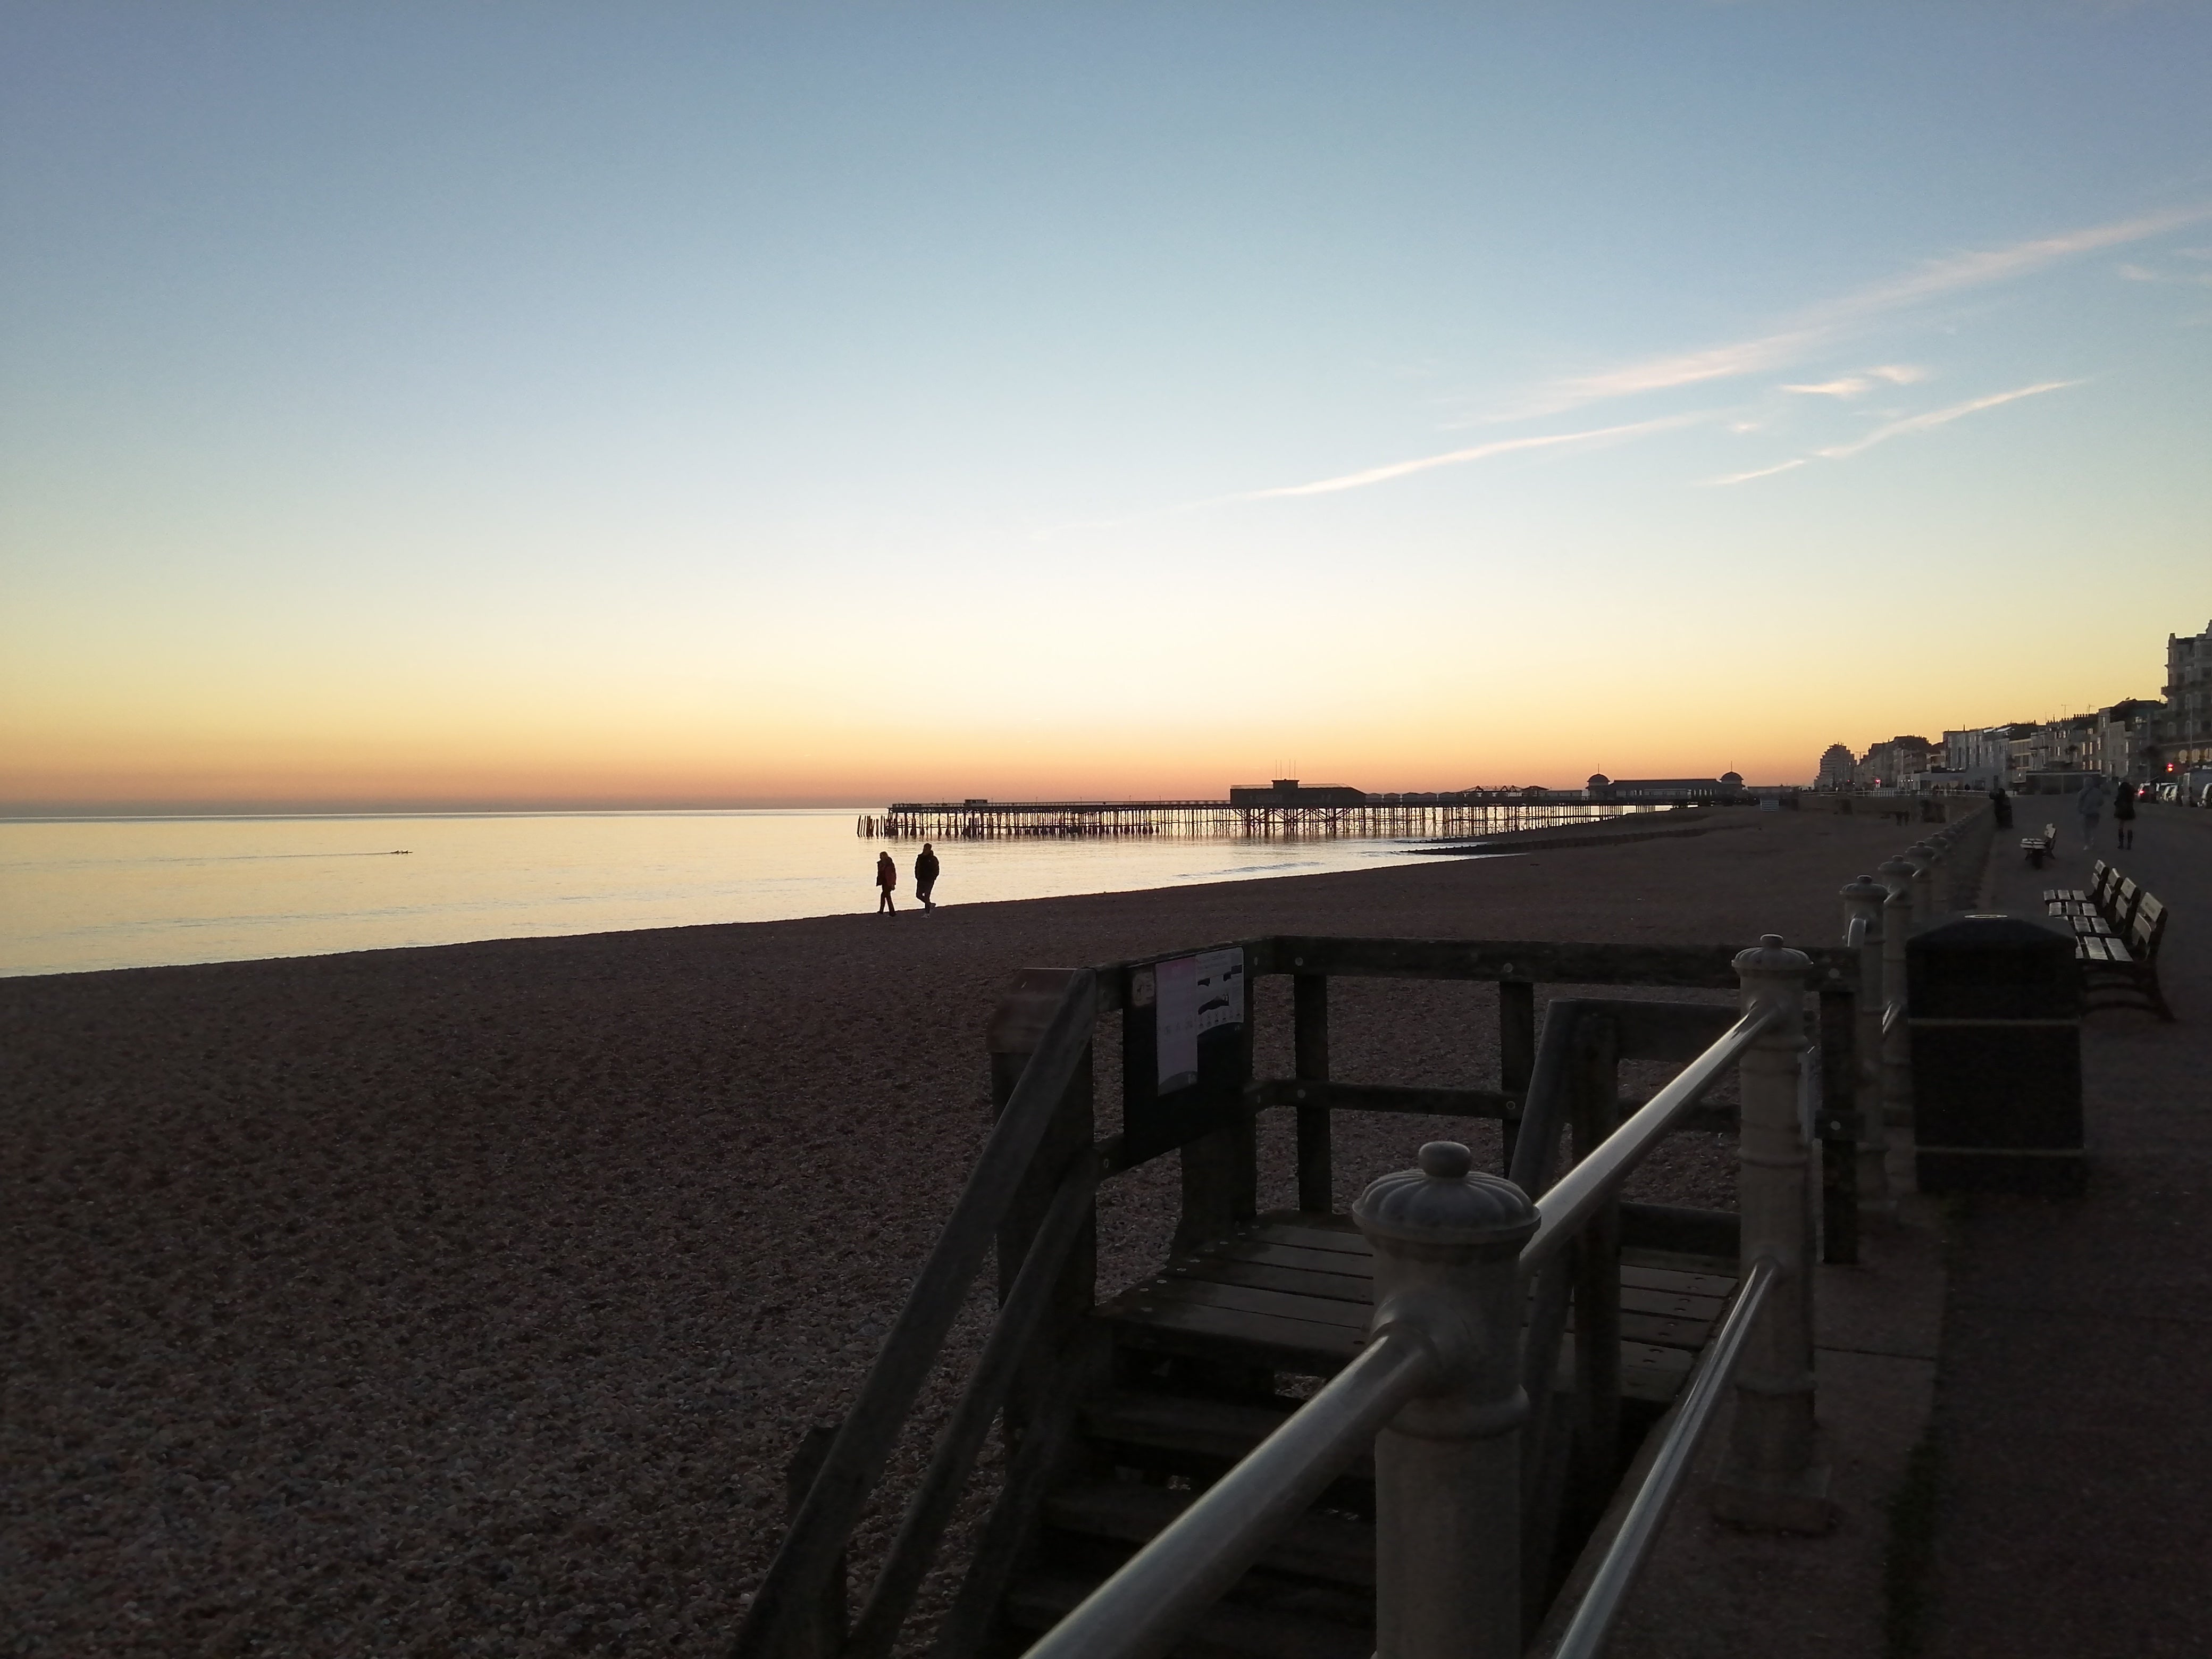 A run along the beautiful Hastings seafront cured the January blues